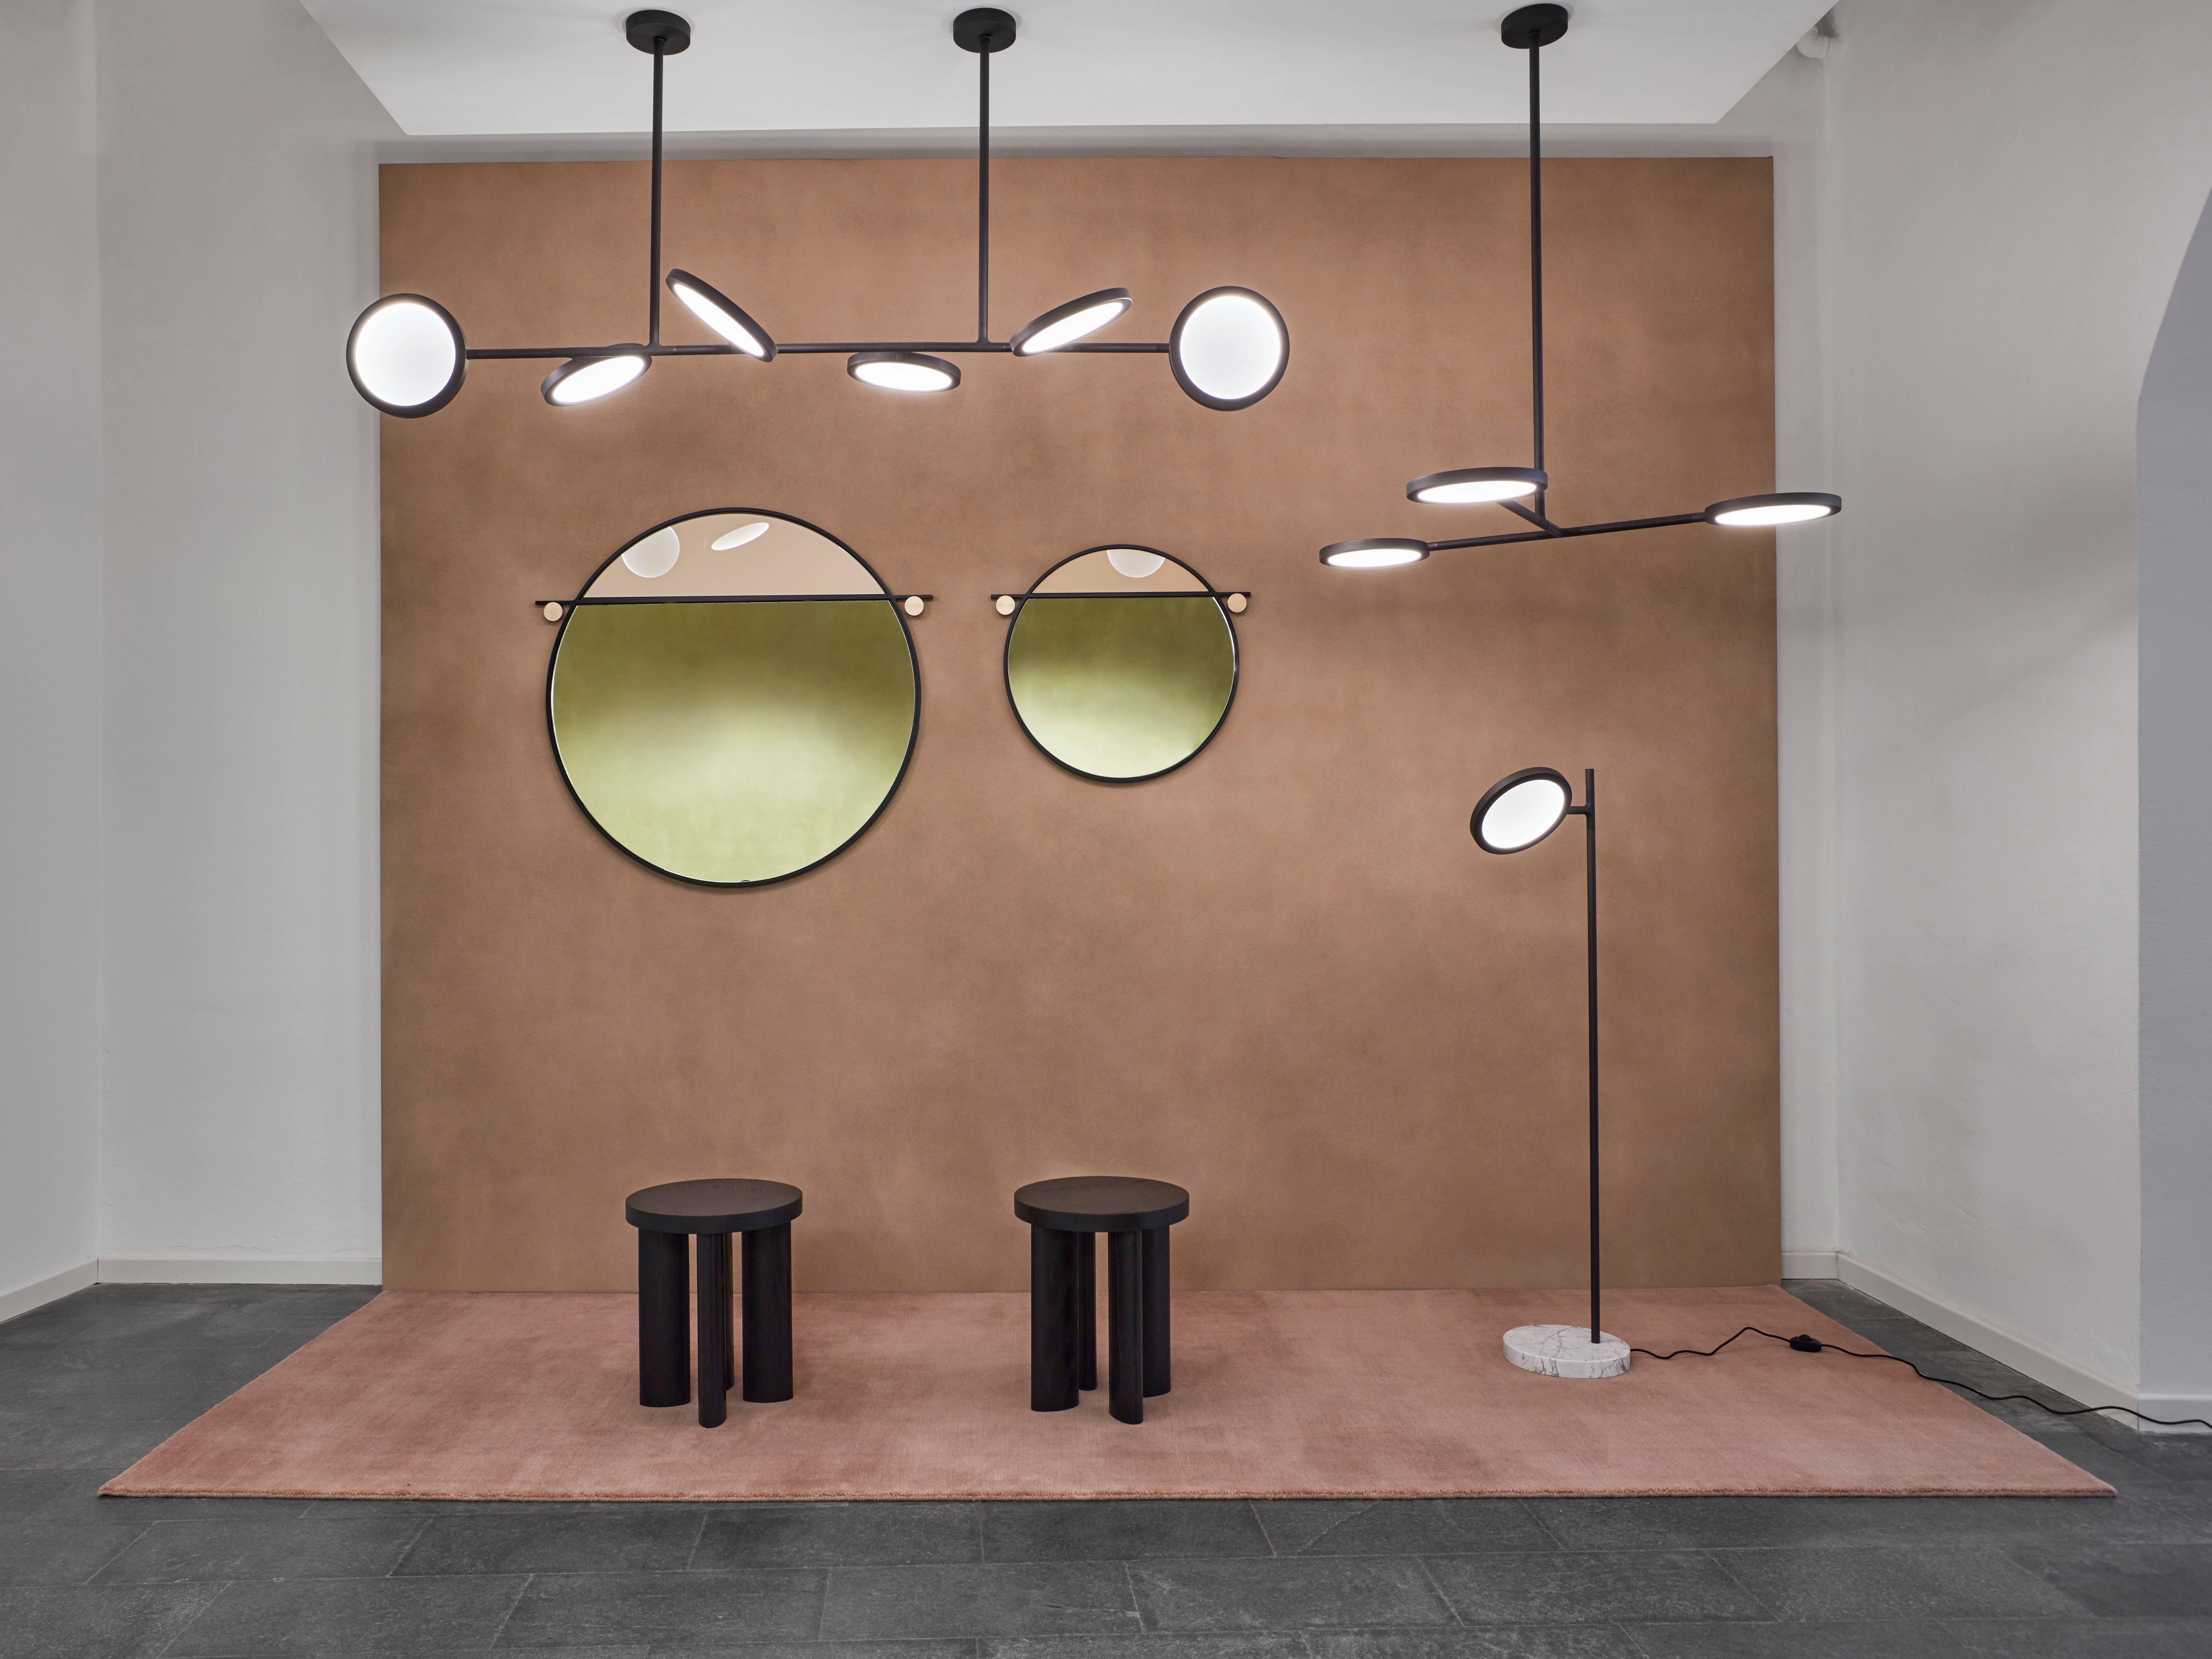 Discus is a spare and graphically com- pelling lighting collection. Made from modular components, the design is adaptable for spaces ranging from intimate to monumental. Dimmable LEDs cast a warm diffused light through both sides of each rotatable